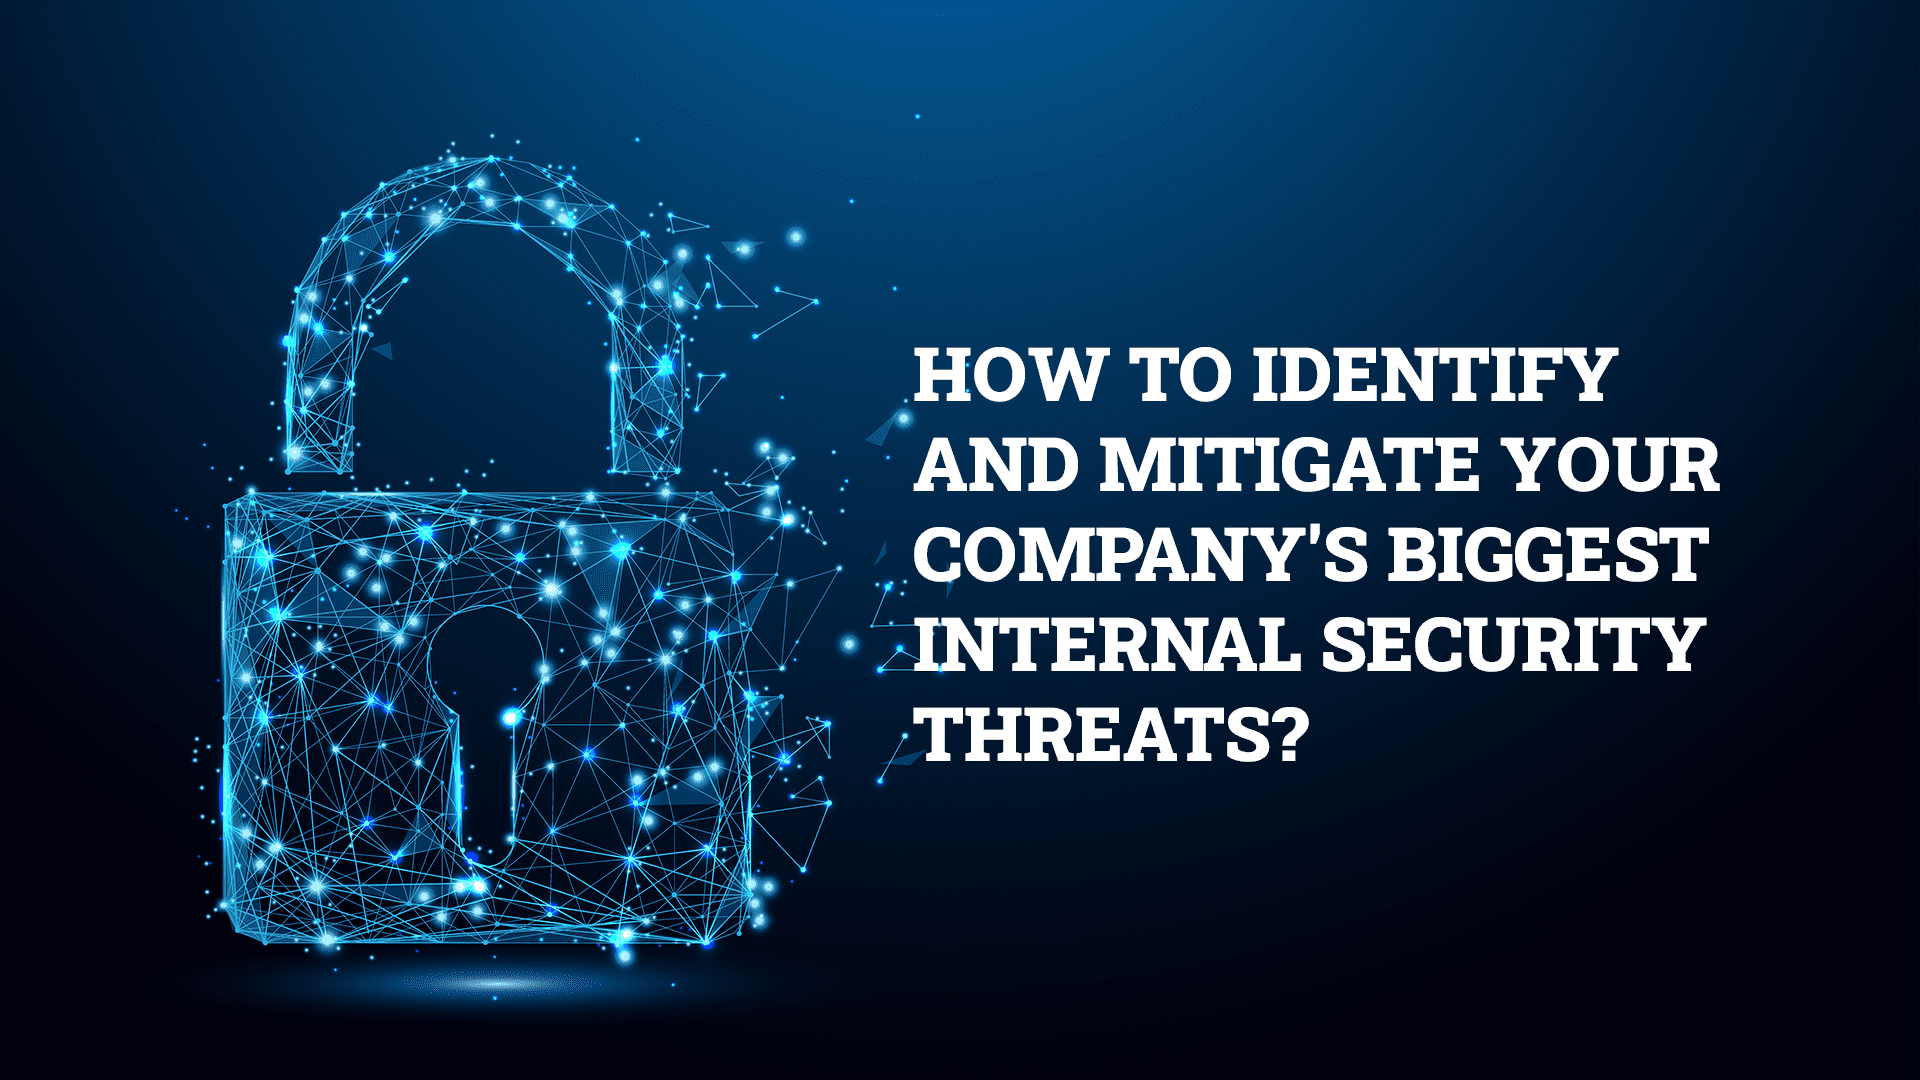 How To Identify and Mitigate Your Company’s Biggest Internal Security Threats?